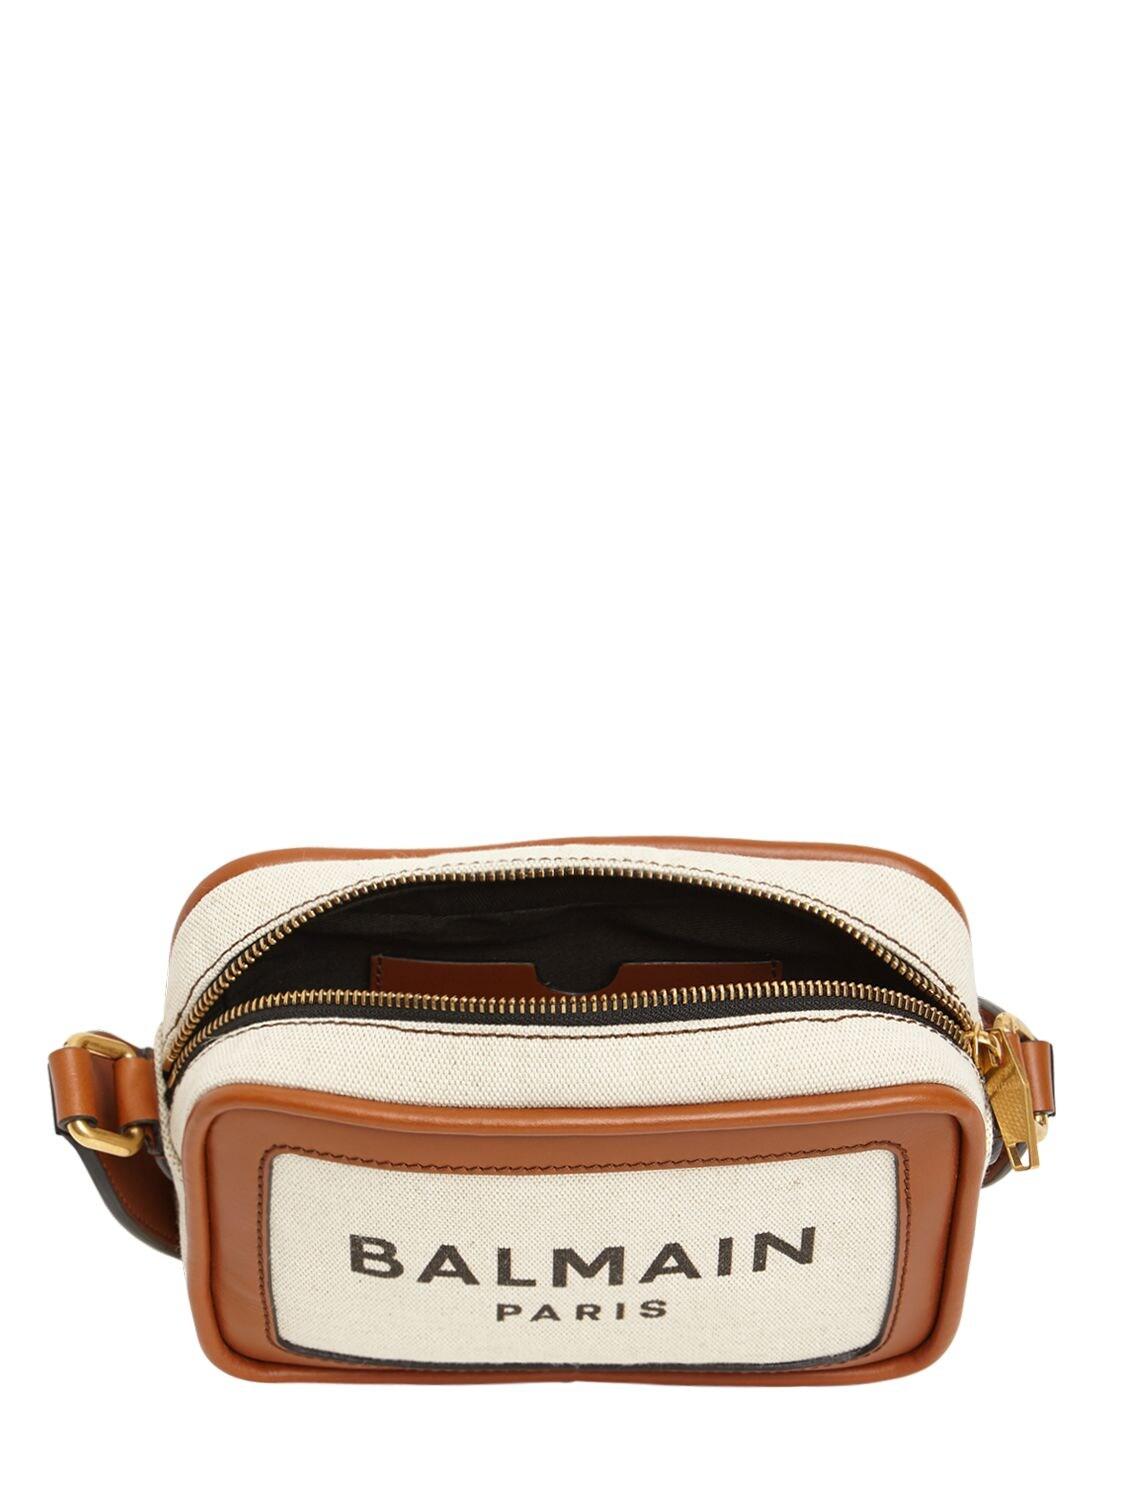 Balmain Barmy Canvas & Leather Camera Bag in Natural Lyst